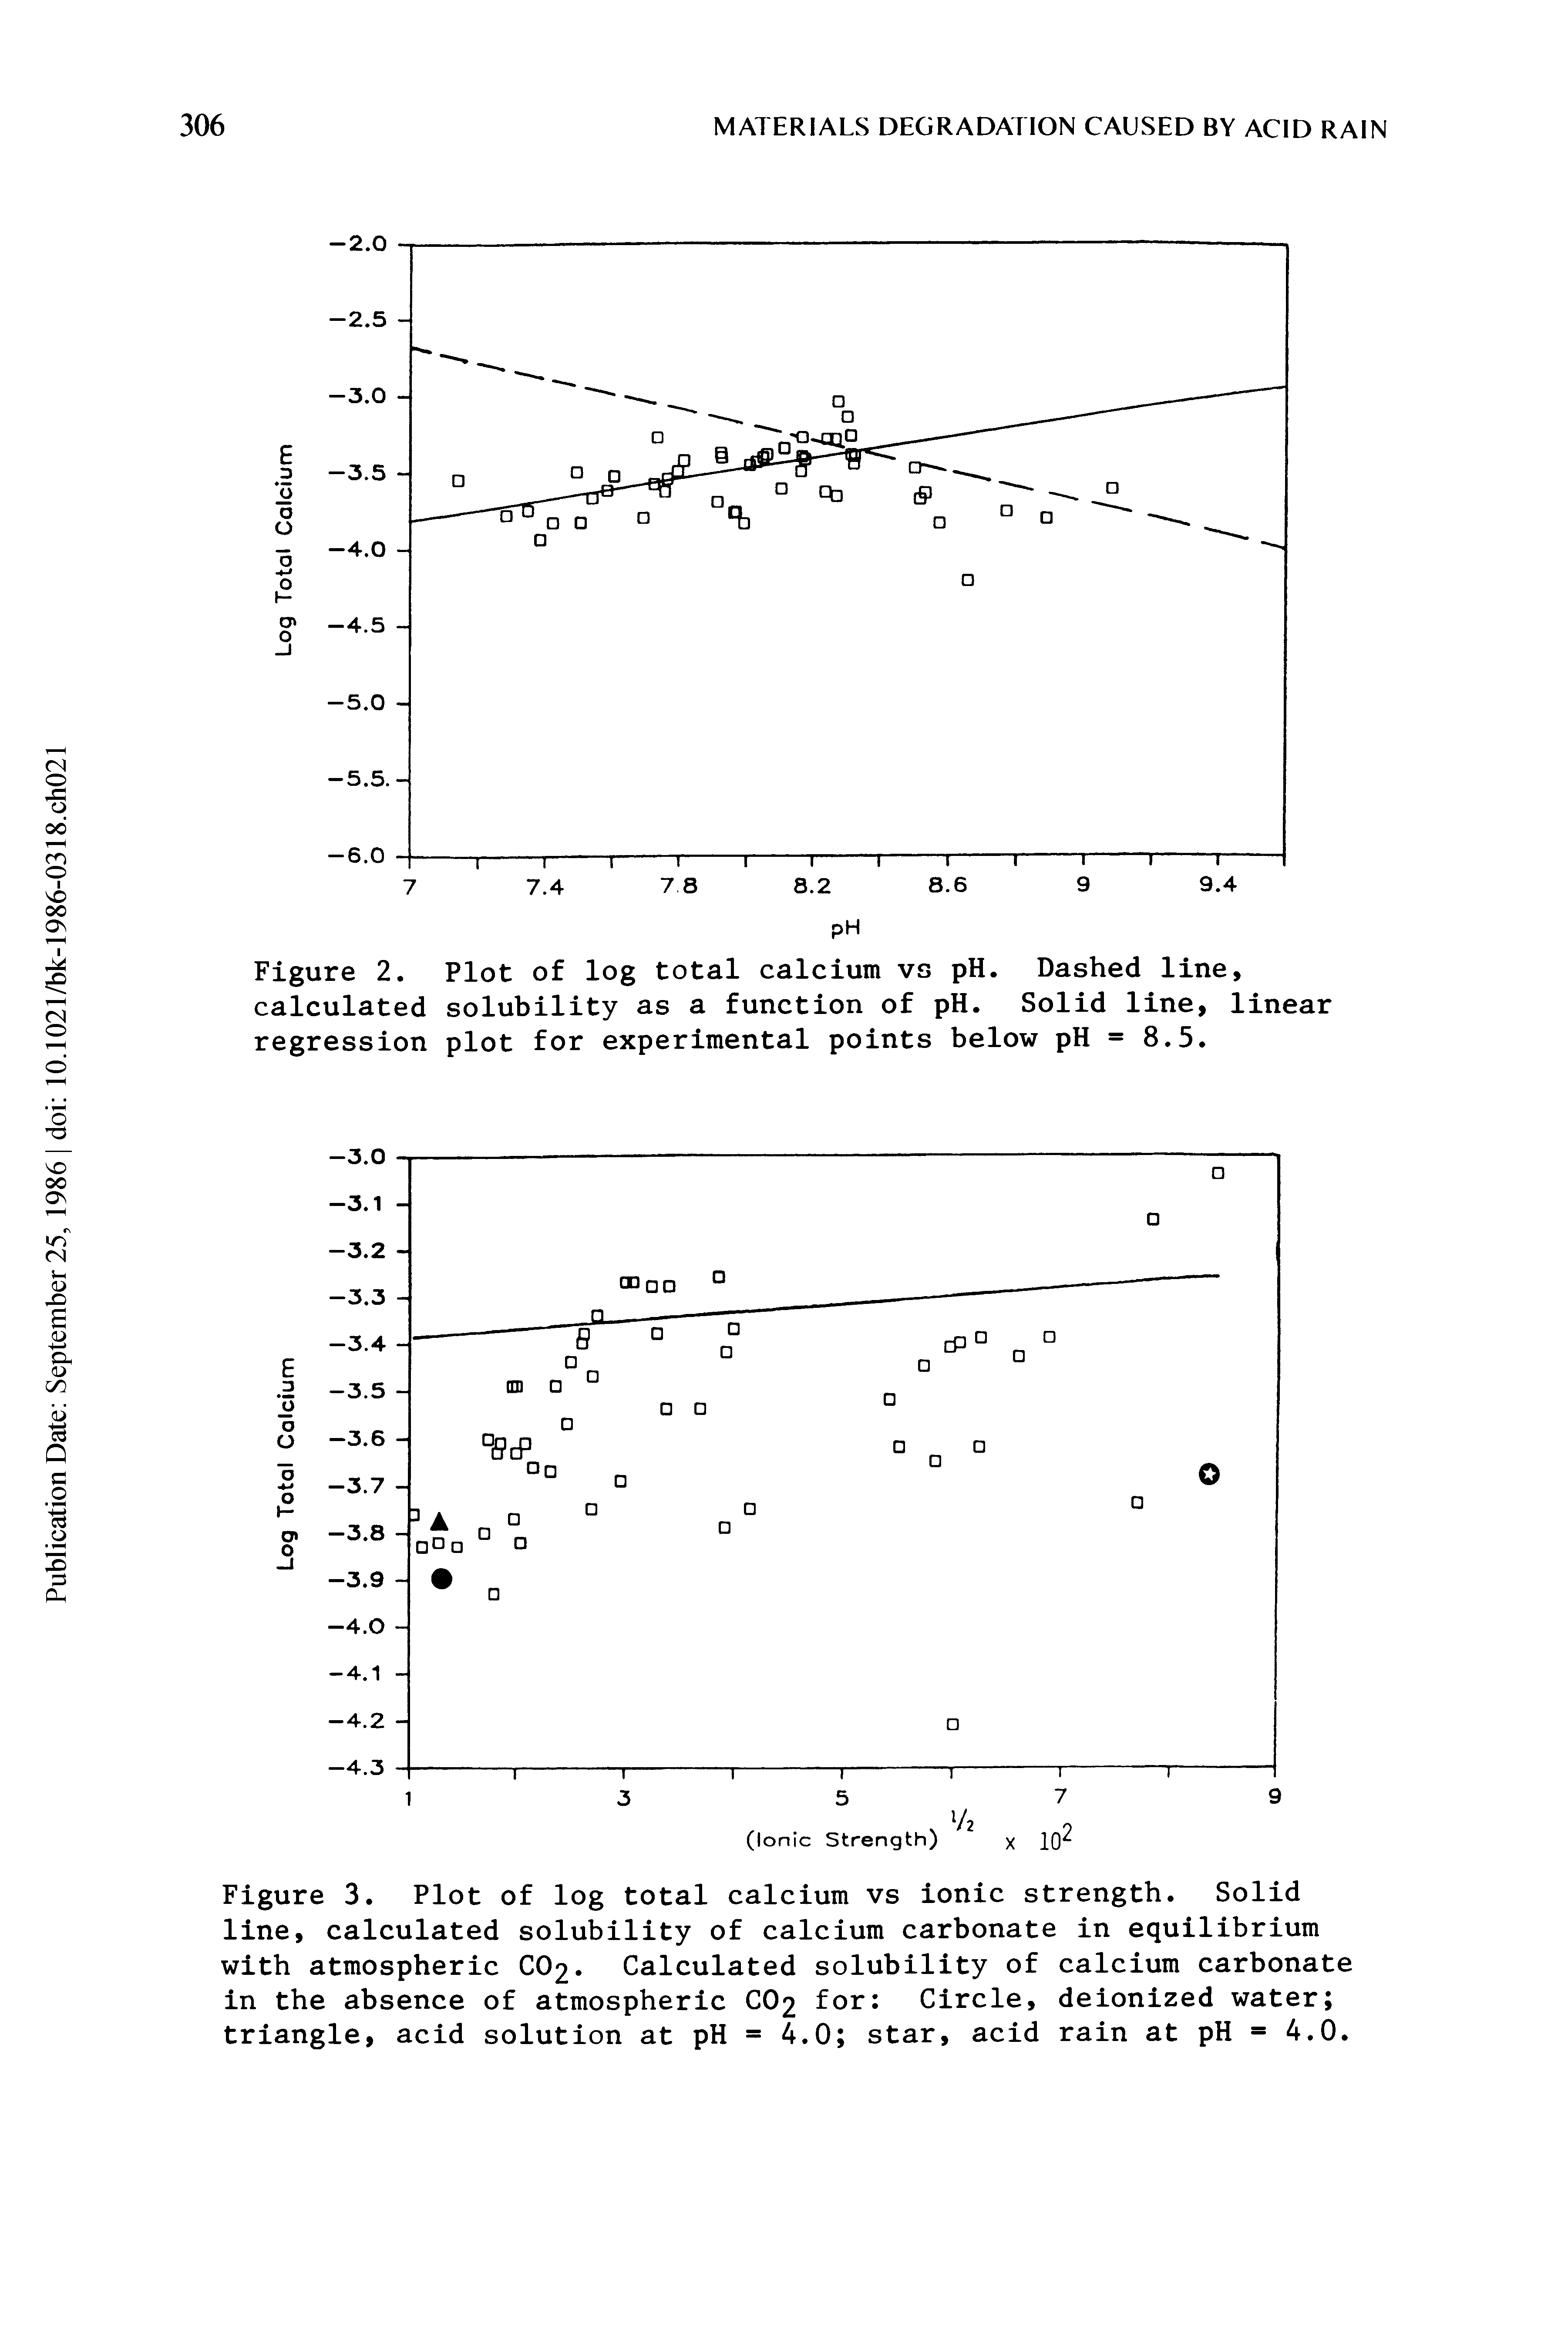 Figure 2. Plot of log total calcium vg pH. Dashed line, calculated solubility as a function of pH. Solid line, linear regression plot for experimental points below pH = 8.5.